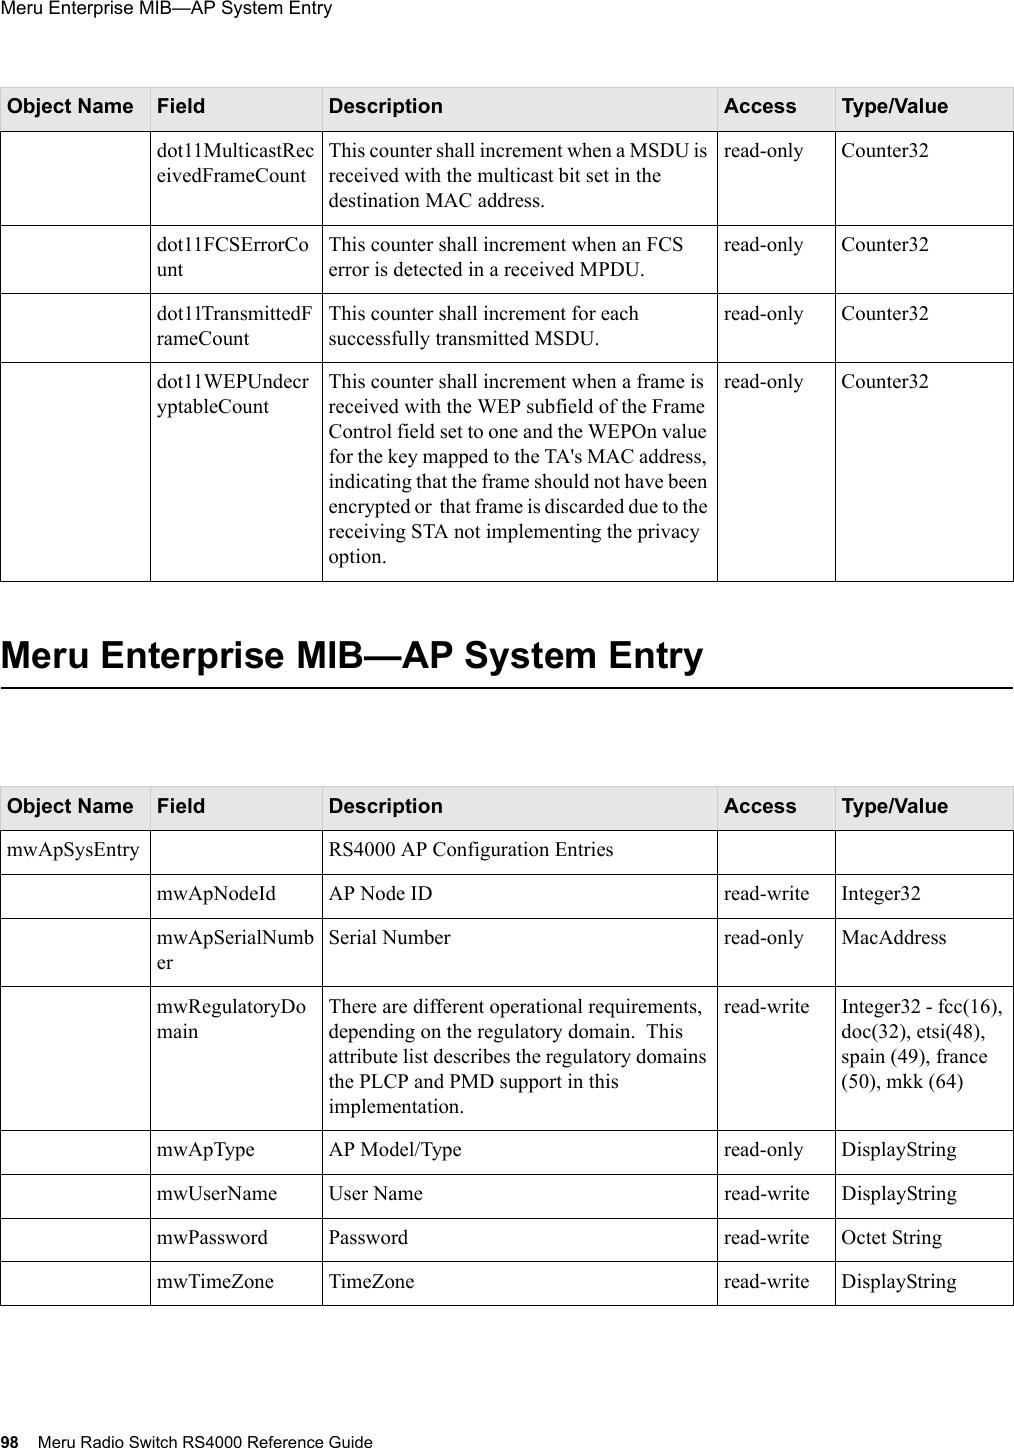 98 Meru Radio Switch RS4000 Reference GuideMeru Enterprise MIB—AP System Entry Meru Enterprise MIB—AP System Entrydot11MulticastReceivedFrameCount This counter shall increment when a MSDU is received with the multicast bit set in the destination MAC address.read-only Counter32dot11FCSErrorCount This counter shall increment when an FCS error is detected in a received MPDU.read-only Counter32dot11TransmittedFrameCount This counter shall increment for each successfully transmitted MSDU.read-only Counter32dot11WEPUndecryptableCount This counter shall increment when a frame is received with the WEP subfield of the Frame Control field set to one and the WEPOn value for the key mapped to the TA&apos;s MAC address, indicating that the frame should not have been encrypted or  that frame is discarded due to the receiving STA not implementing the privacy option.read-only Counter32Object Name Field Description Access Type/ValuemwApSysEntry RS4000 AP Configuration EntriesmwApNodeId AP Node ID read-write Integer32mwApSerialNumberSerial Number read-only MacAddressmwRegulatoryDomainThere are different operational requirements, depending on the regulatory domain.  This attribute list describes the regulatory domains the PLCP and PMD support in this implementation.read-write Integer32 - fcc(16), doc(32), etsi(48), spain (49), france (50), mkk (64)mwApType AP Model/Type read-only DisplayStringmwUserName User Name read-write DisplayStringmwPassword Password read-write Octet StringmwTimeZone TimeZone read-write DisplayStringObject Name Field Description Access Type/Value